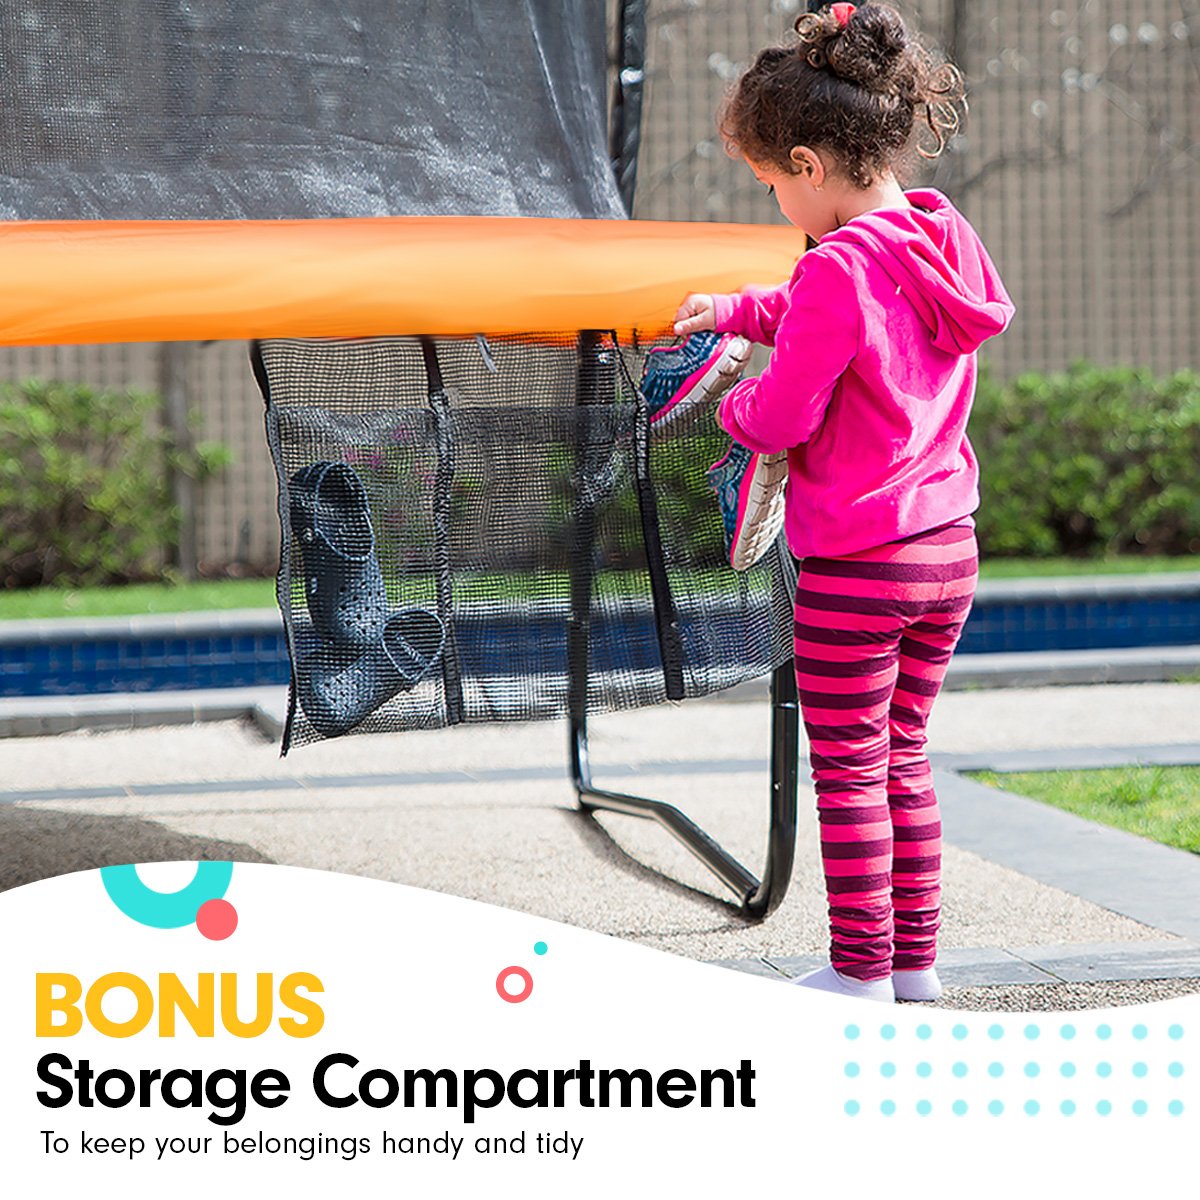 Kahuna Classic 6ft Outdoor Round Orange Trampoline Safety Enclosure And Basketball Hoop Set | Auzzi Store